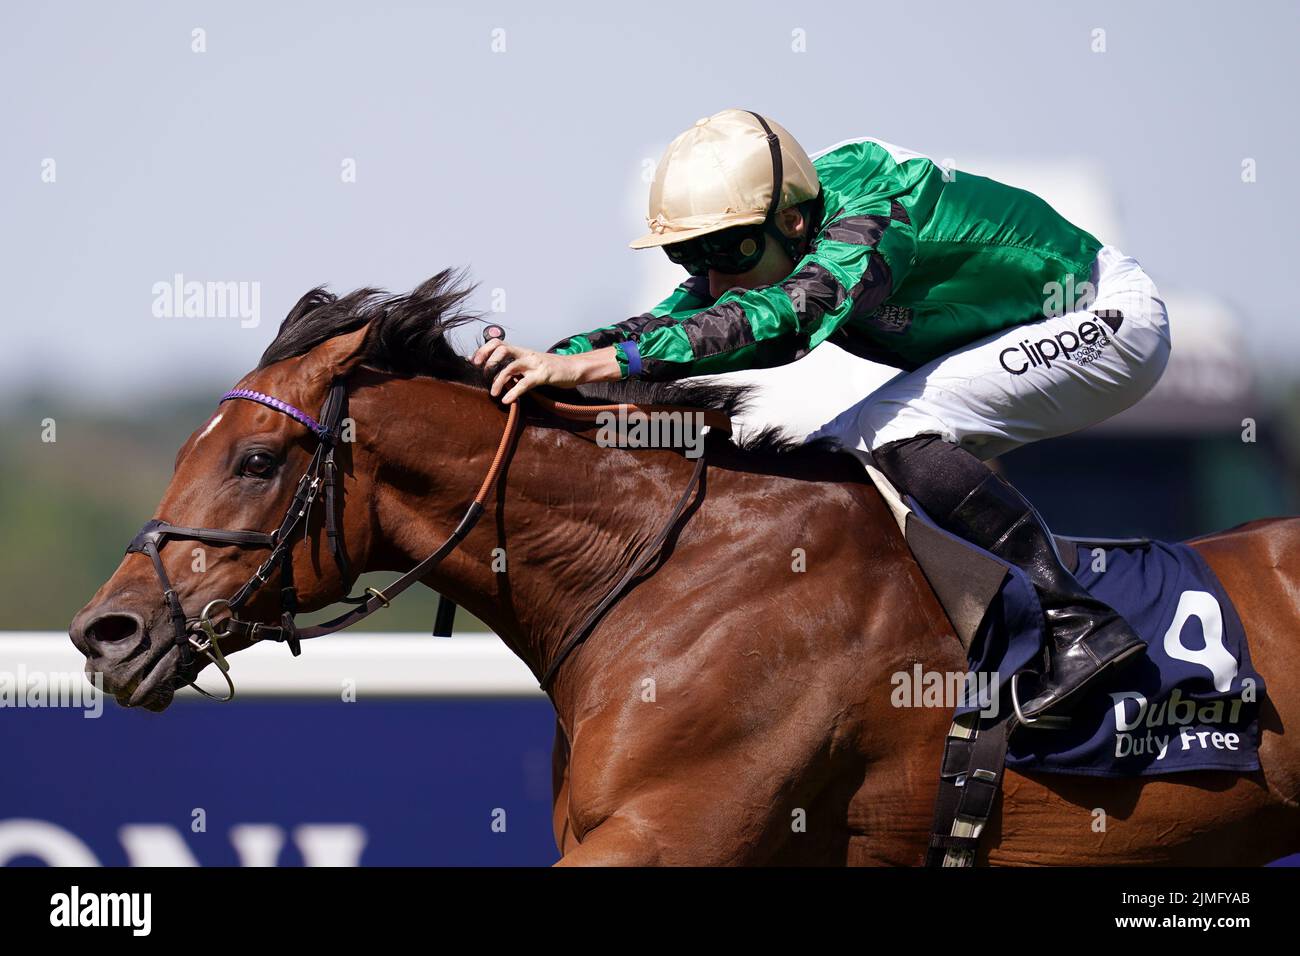 Pride of Priory ridden by Kieran Shoemark comes home to win The Dubai Duty Free Shergar Cup Challenge during the Shergar Cup Meeting at Ascot Racecourse. Picture date: Saturday August 8, 2022. Stock Photo